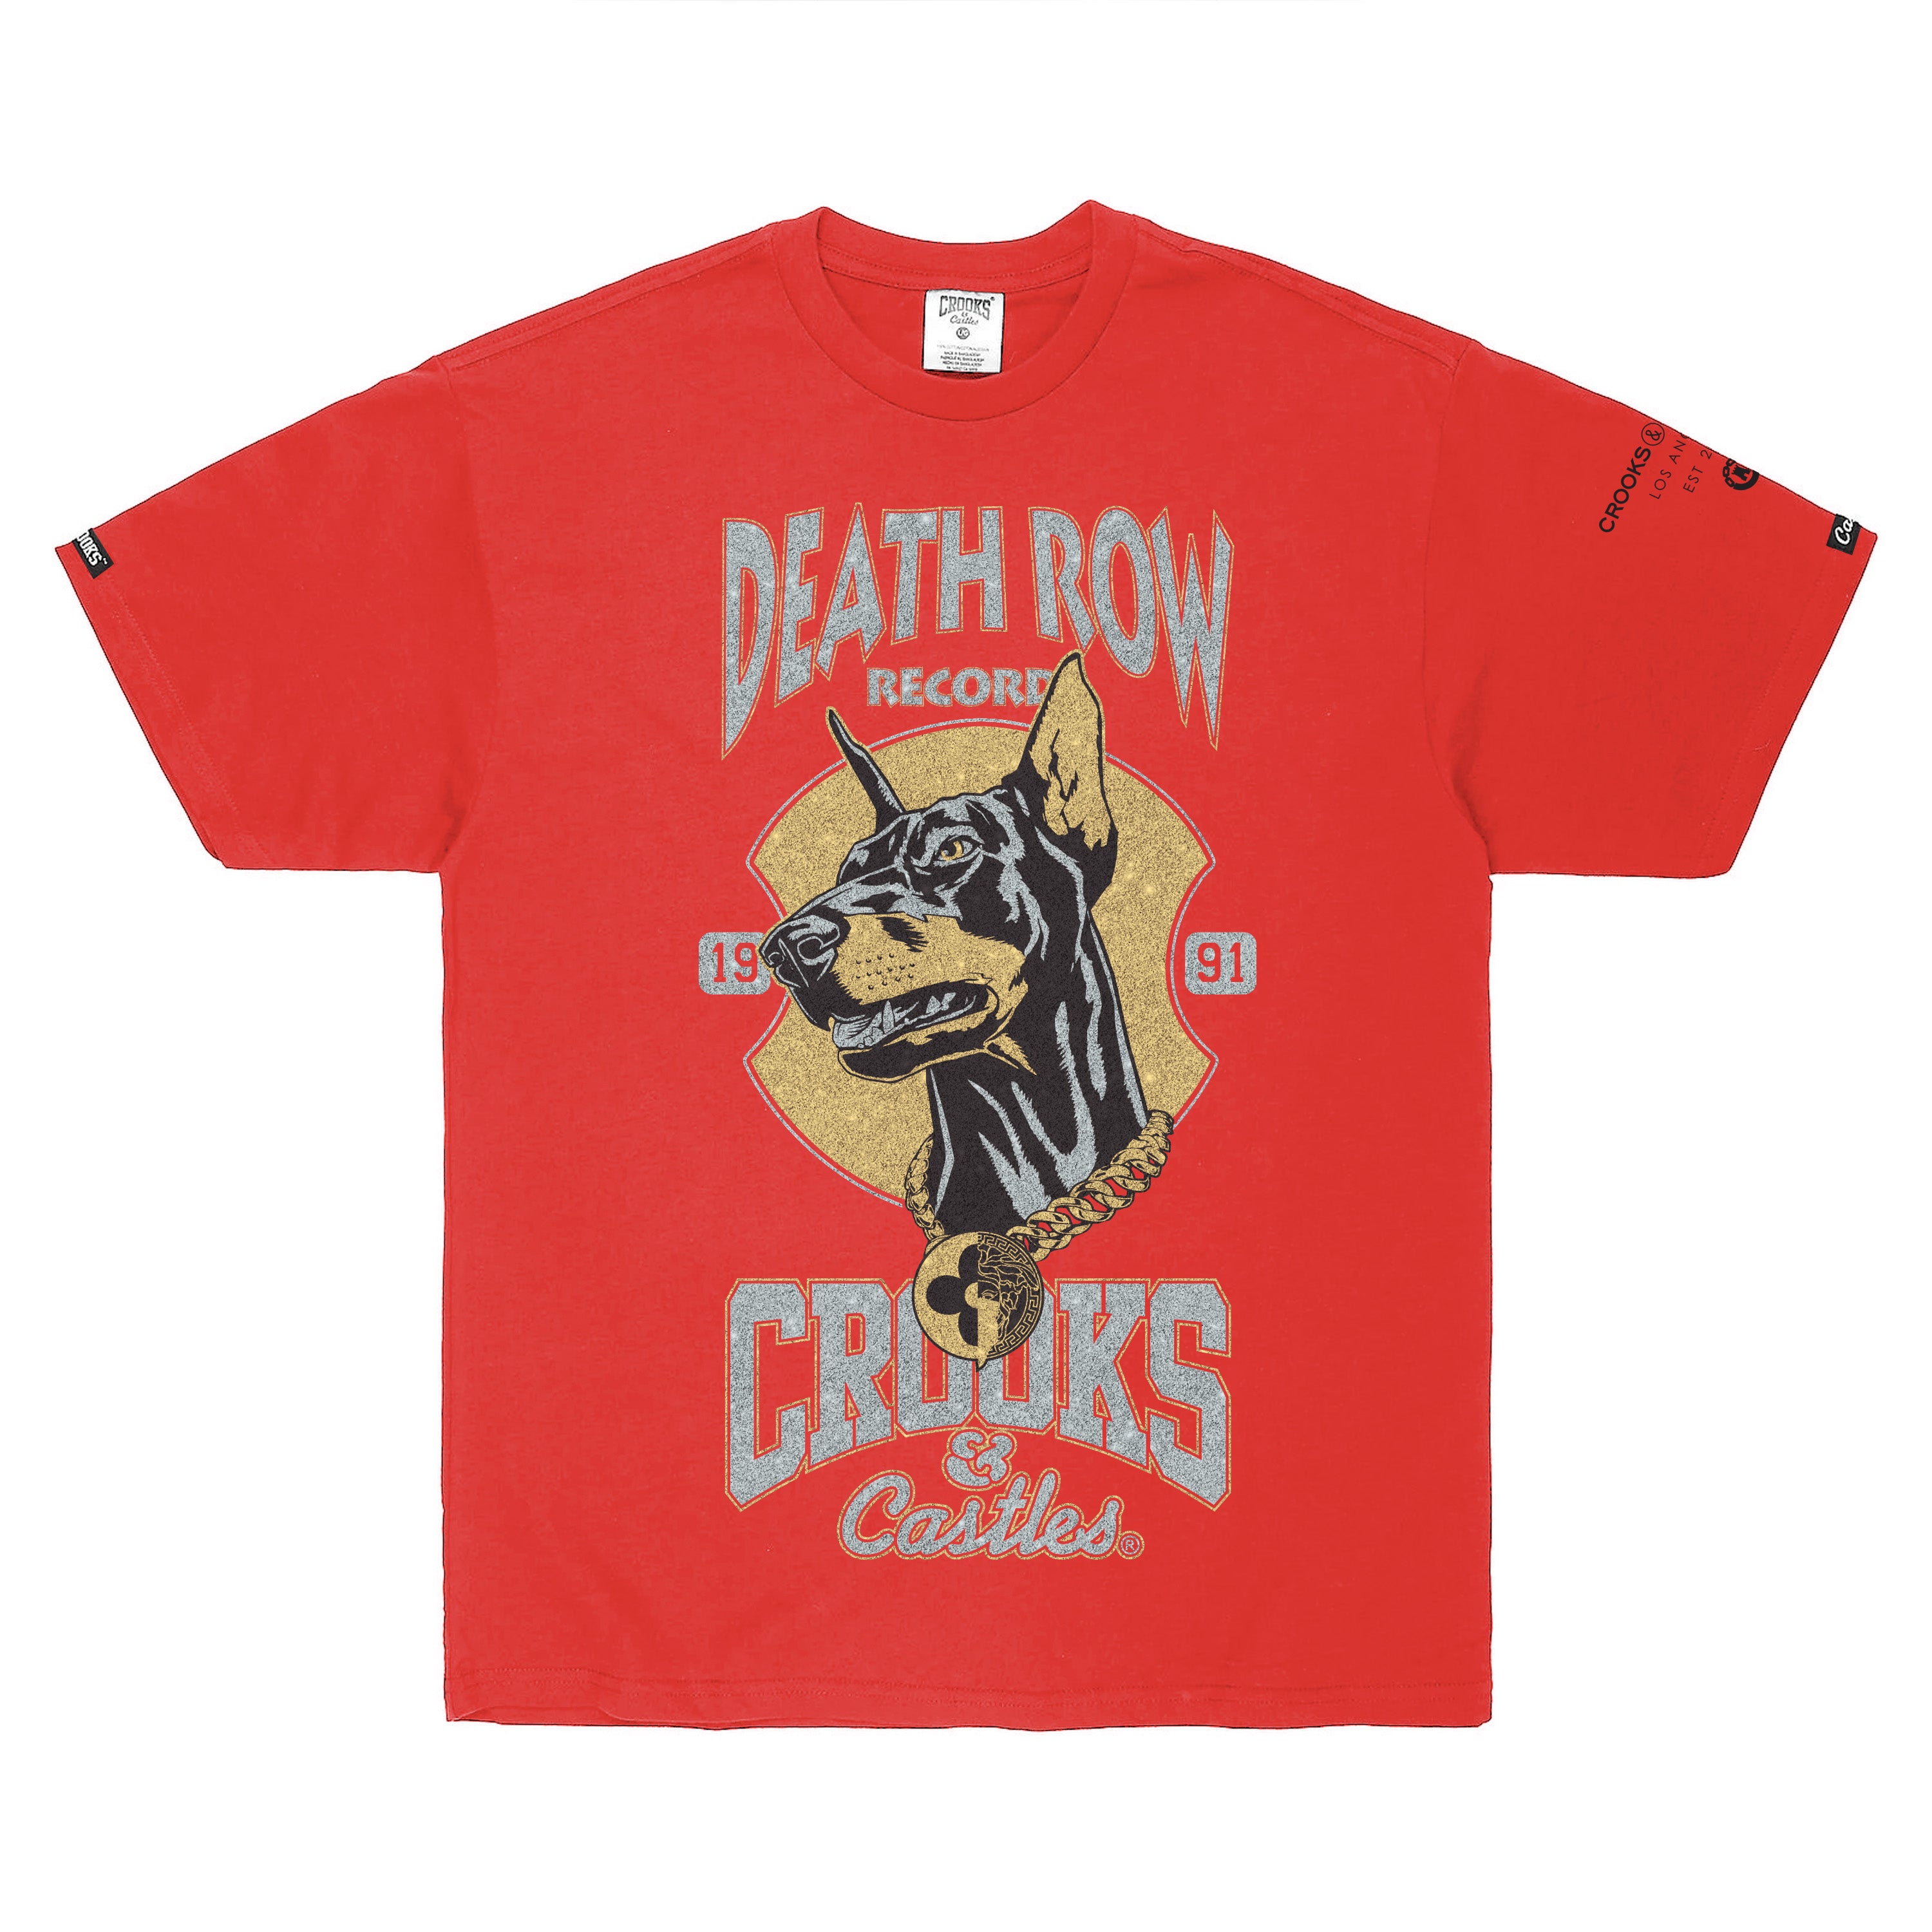 Death Row x Crooks Dog Tee in Red